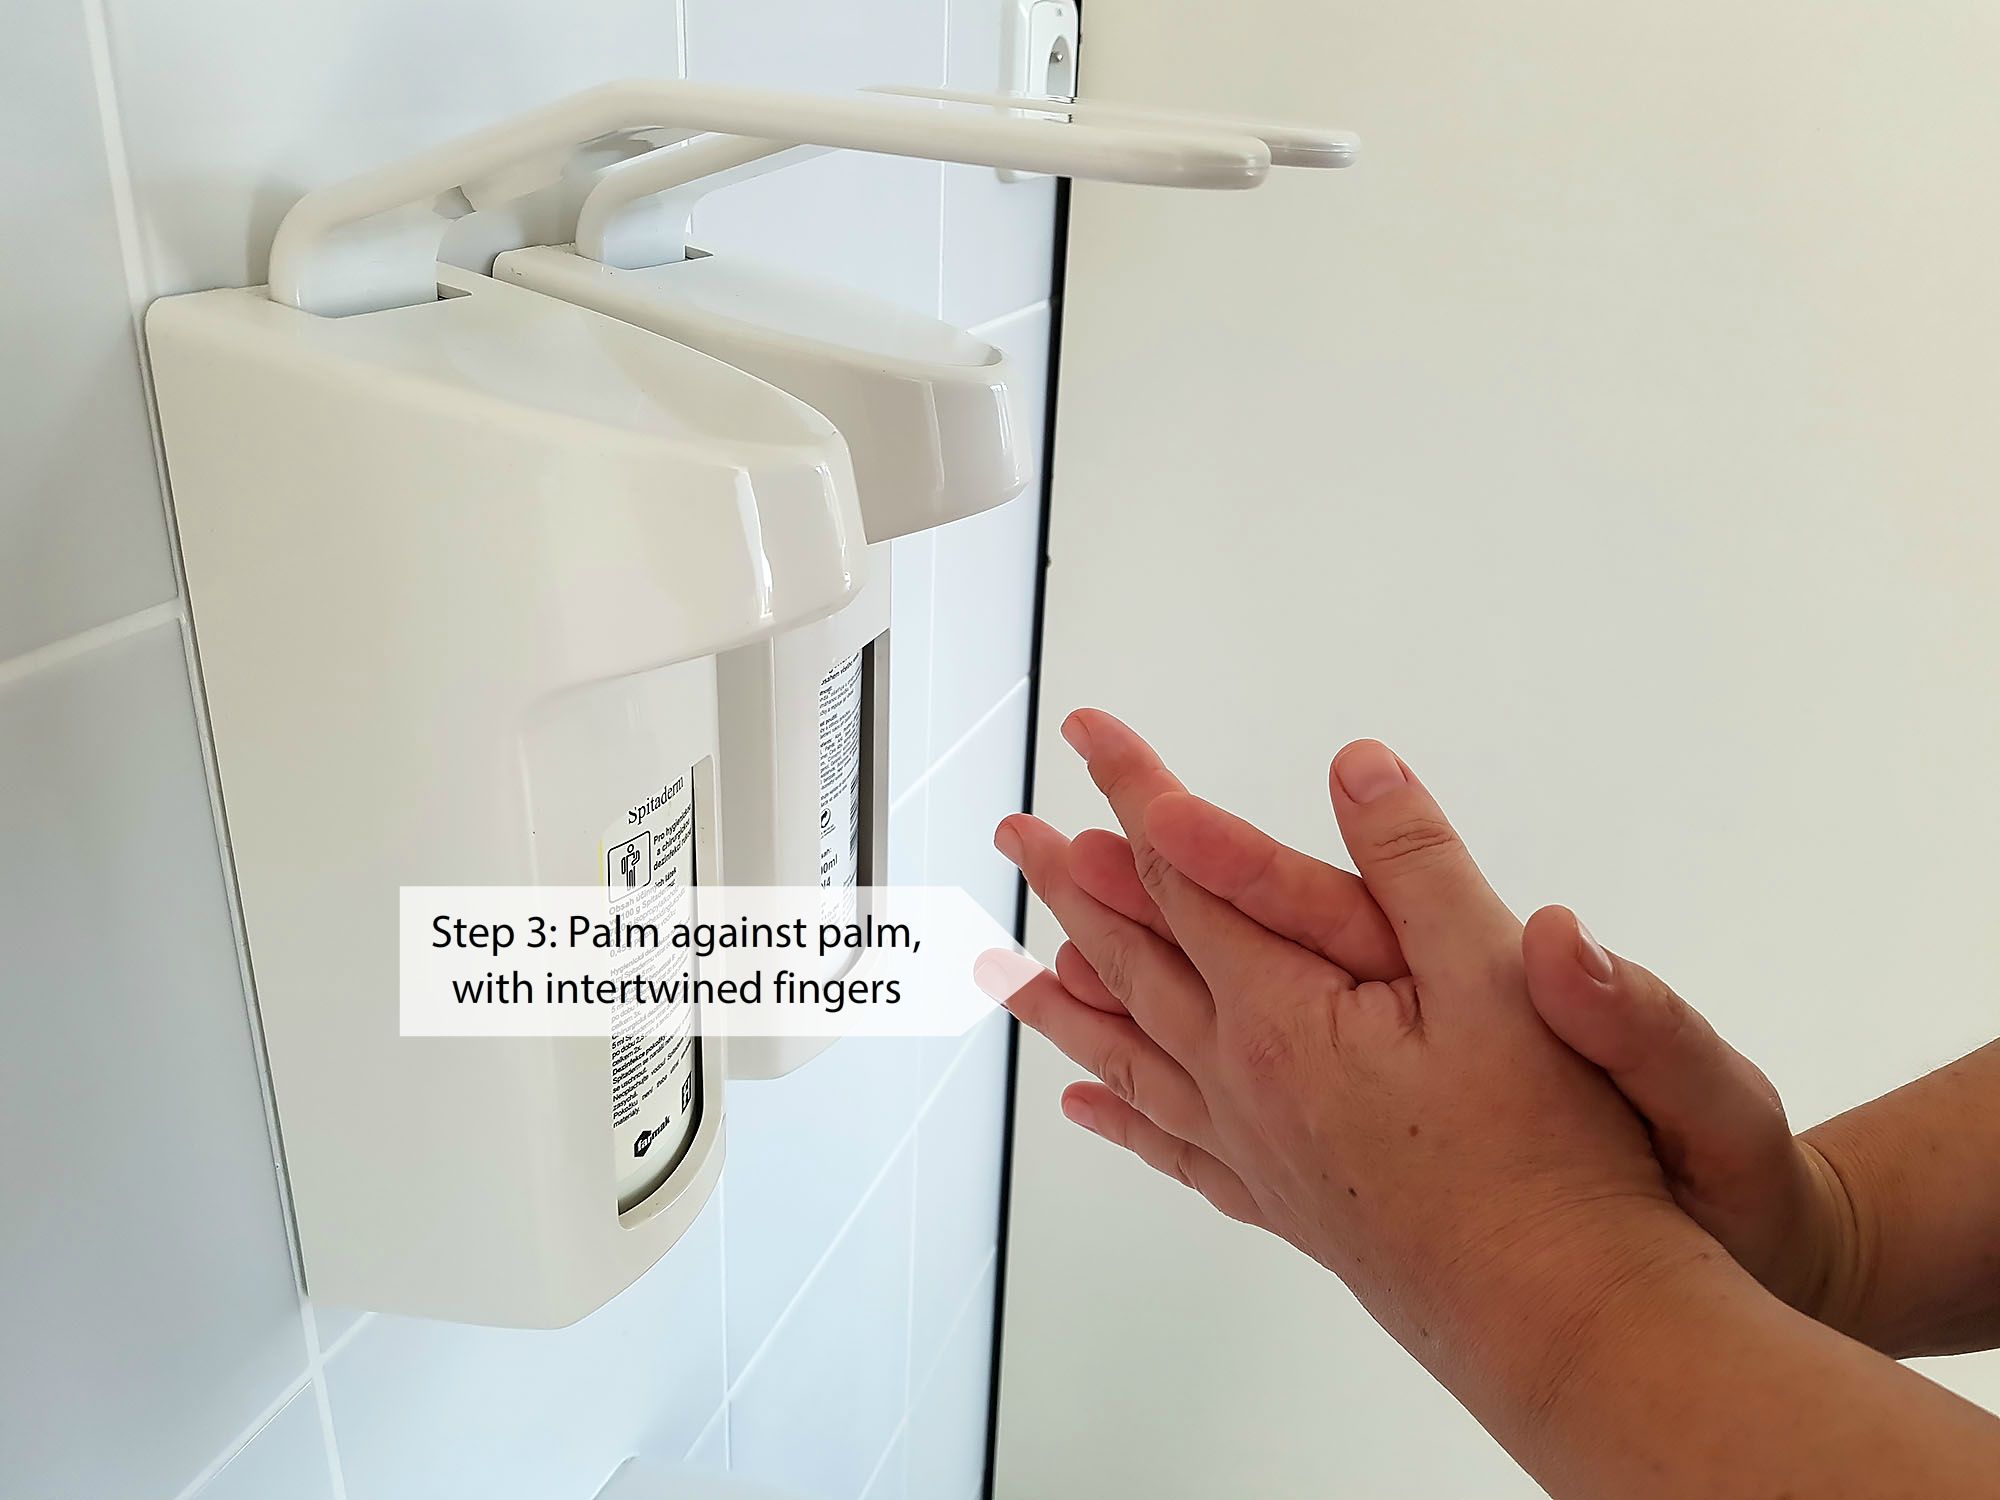 Procedure for rubbing the disinfectant solution during hygienic hand disinfection (Step 3)